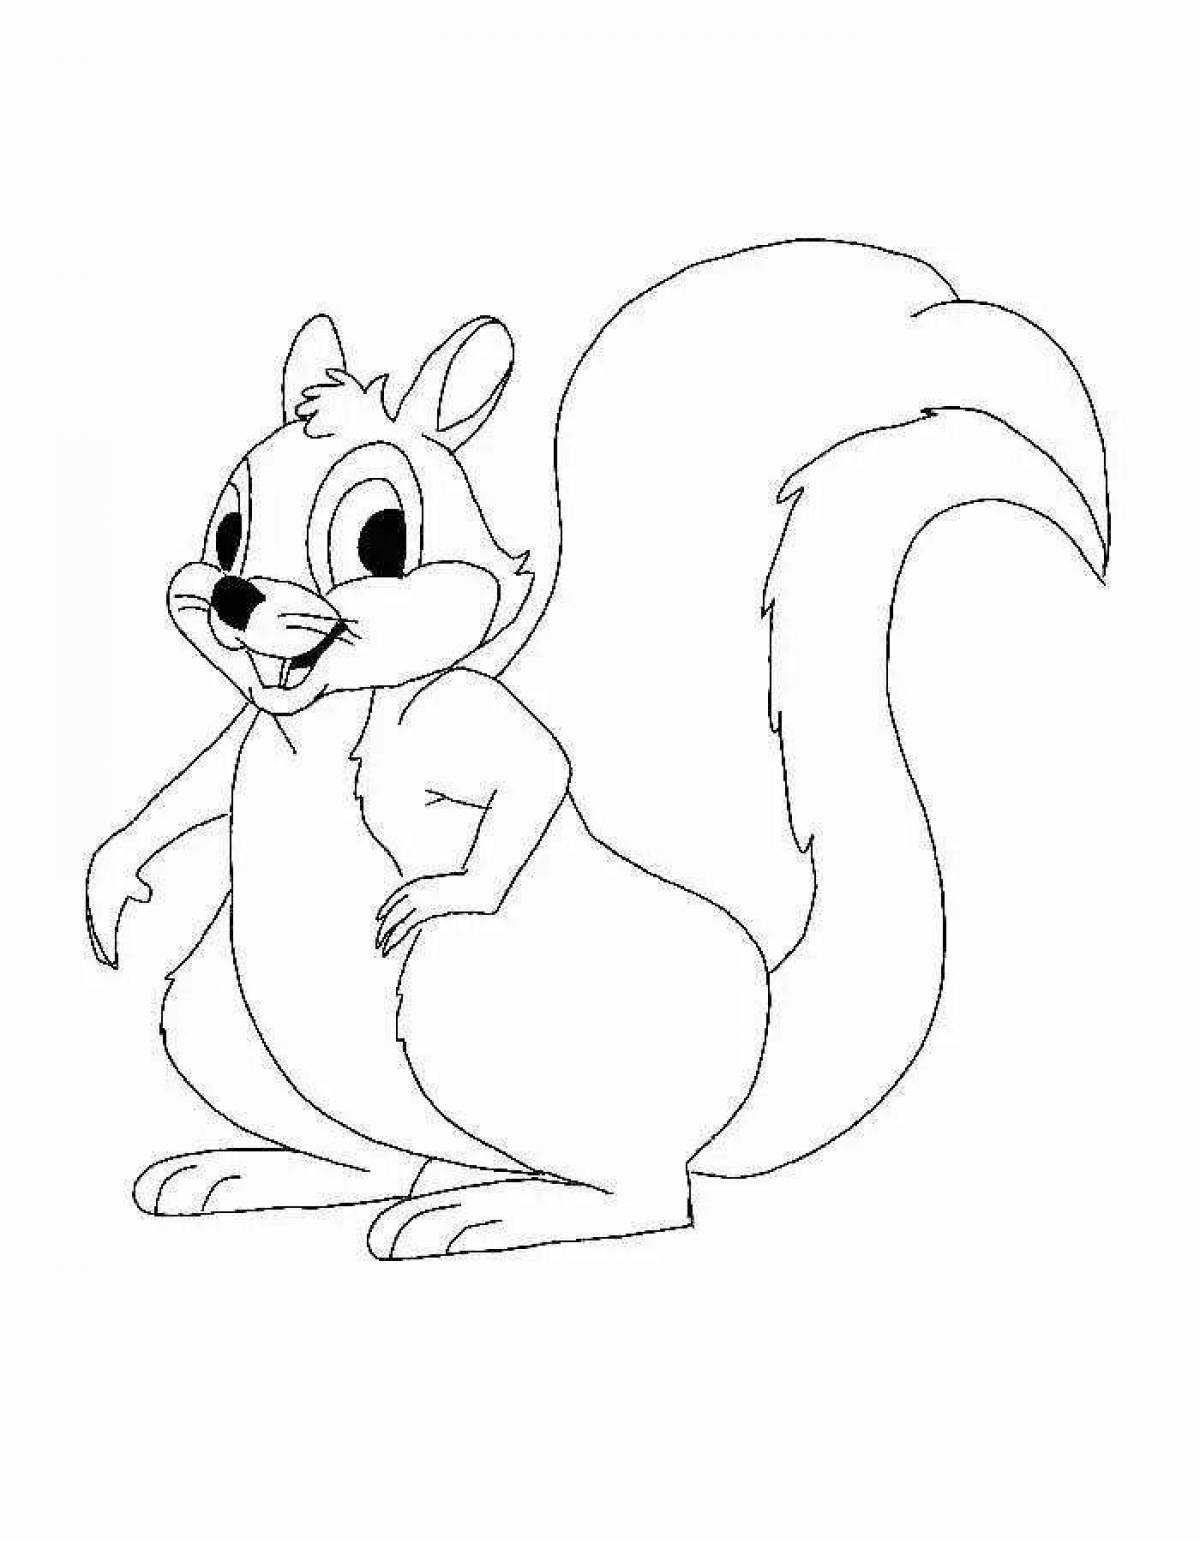 Great squirrel coloring book for kids